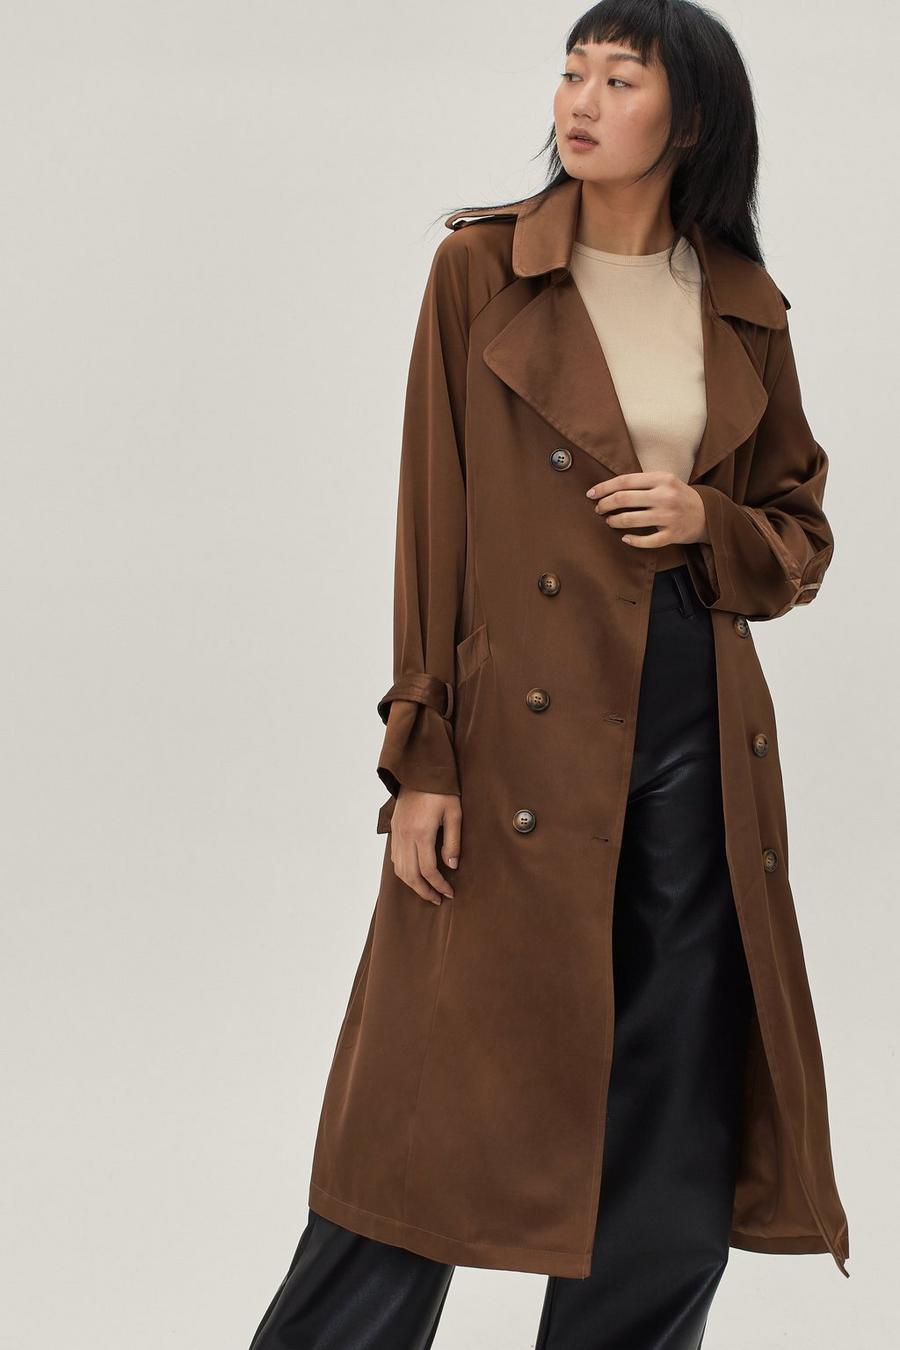 Satin Longline Double Breasted Belted Trench Coat